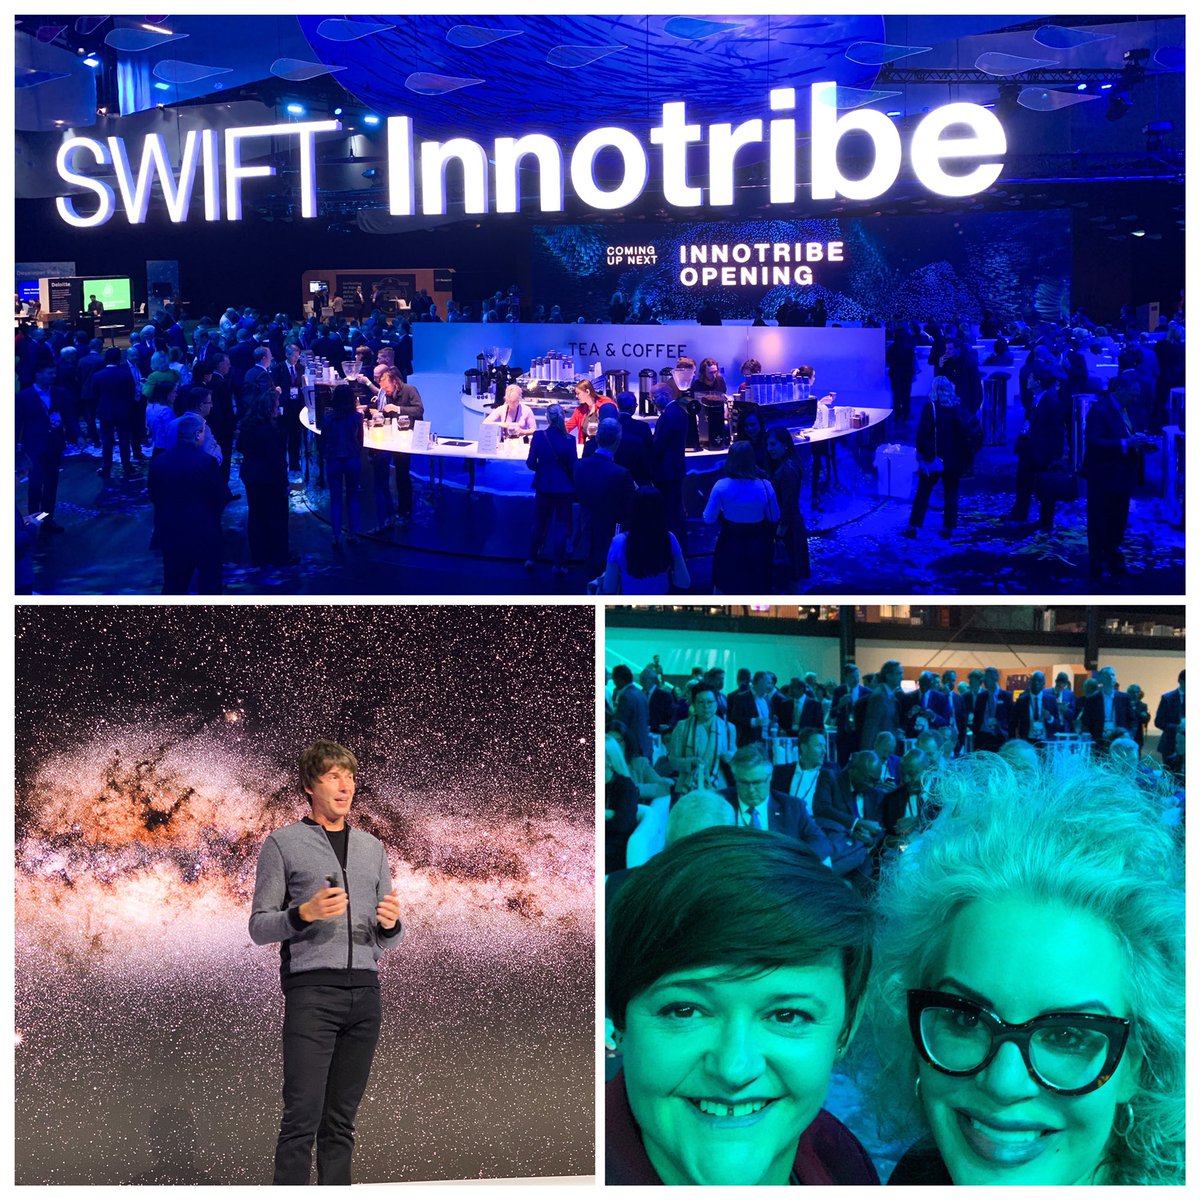 Professor Brian Cox giving the opening remarks @Sibos at the SWIFT @Innotribe stage this morning! Great to bump into @GhelaBoskovich #sibos!